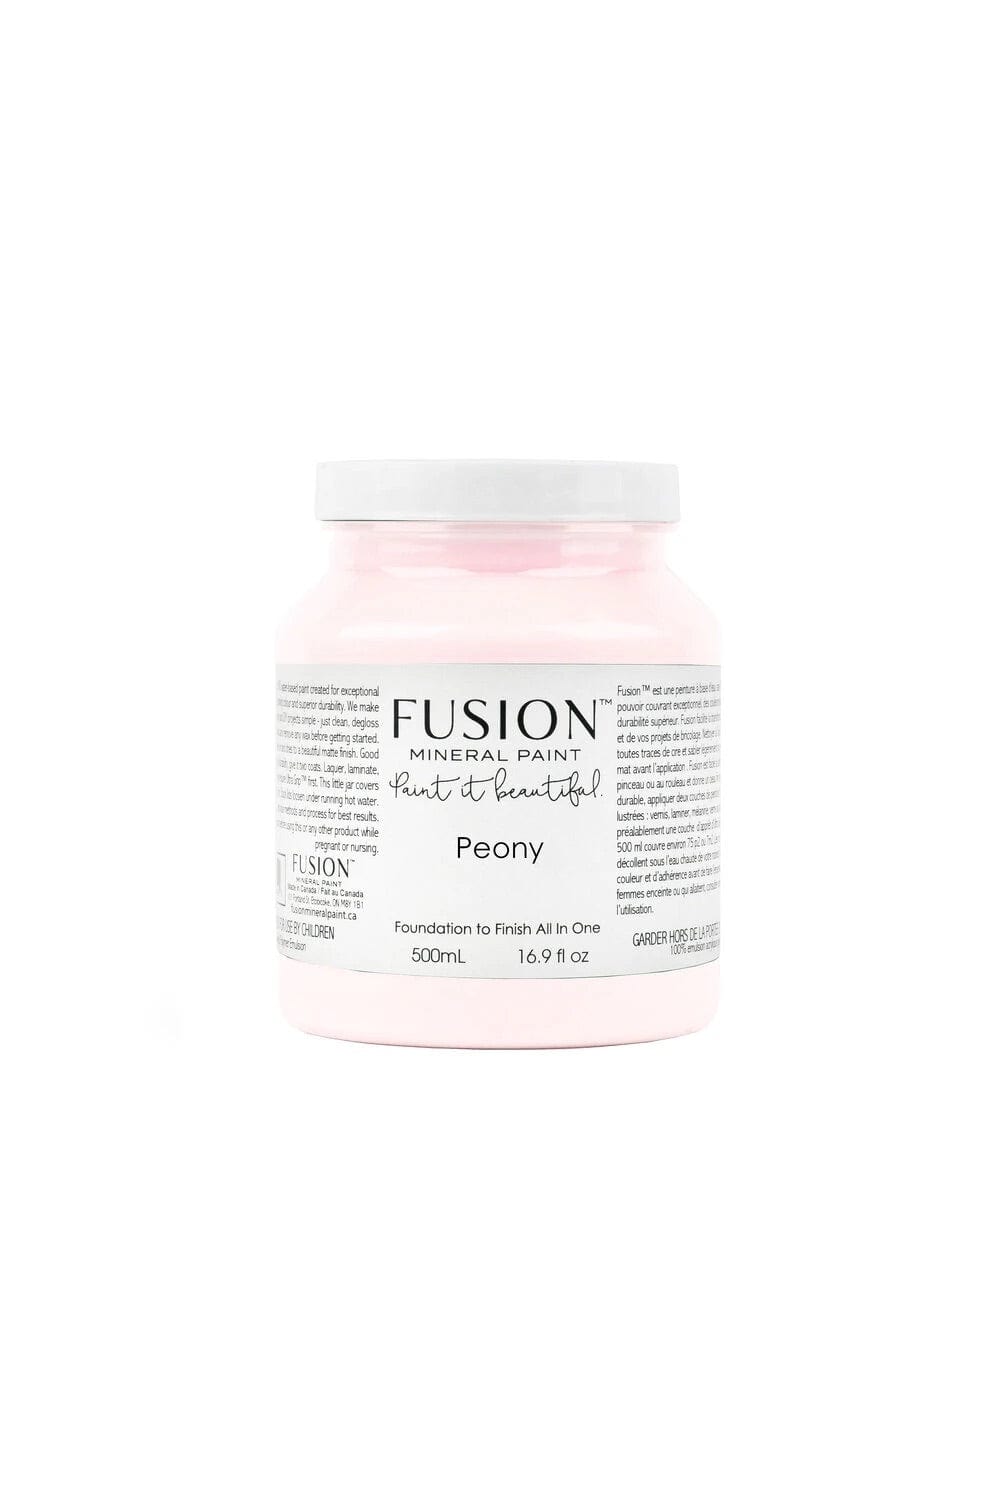 Fusion Fusion Mineral Paint Pint 500mil/16.9oz Fusion Mineral Paint - Peony